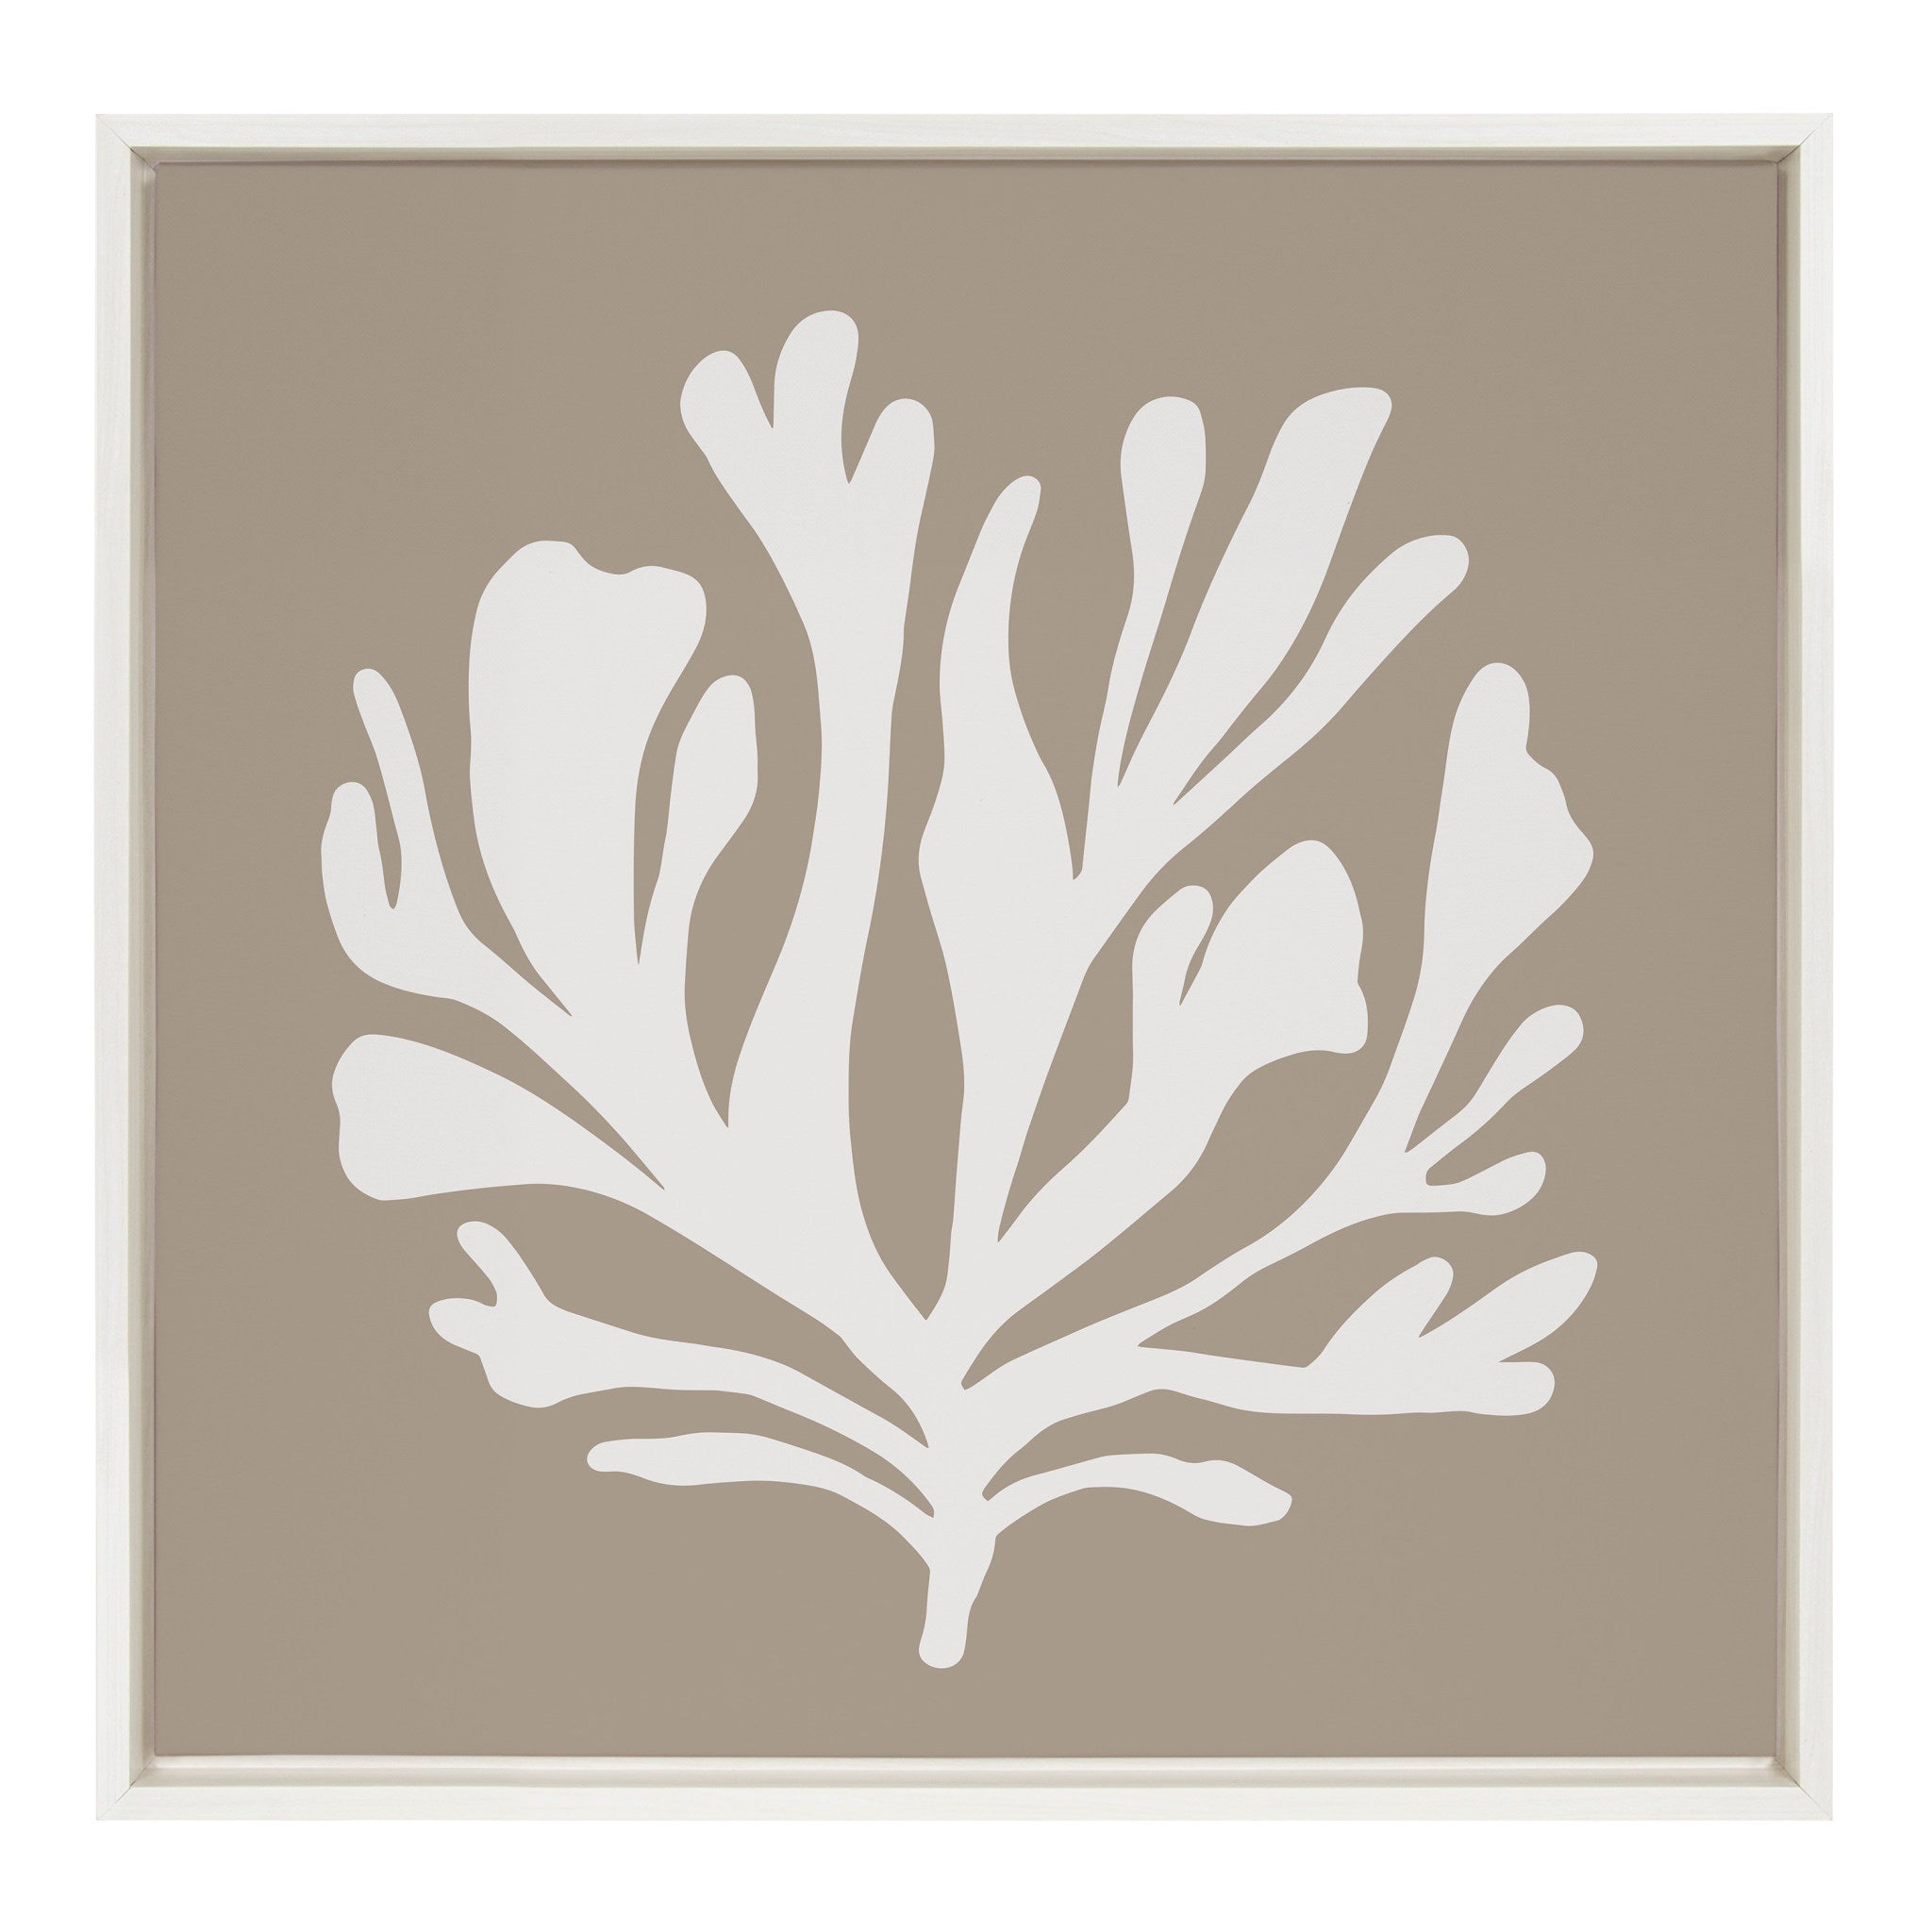 Sylvie Sophisticated Neutral Coral Tan Framed Canvas by The Creative Bunch Studio